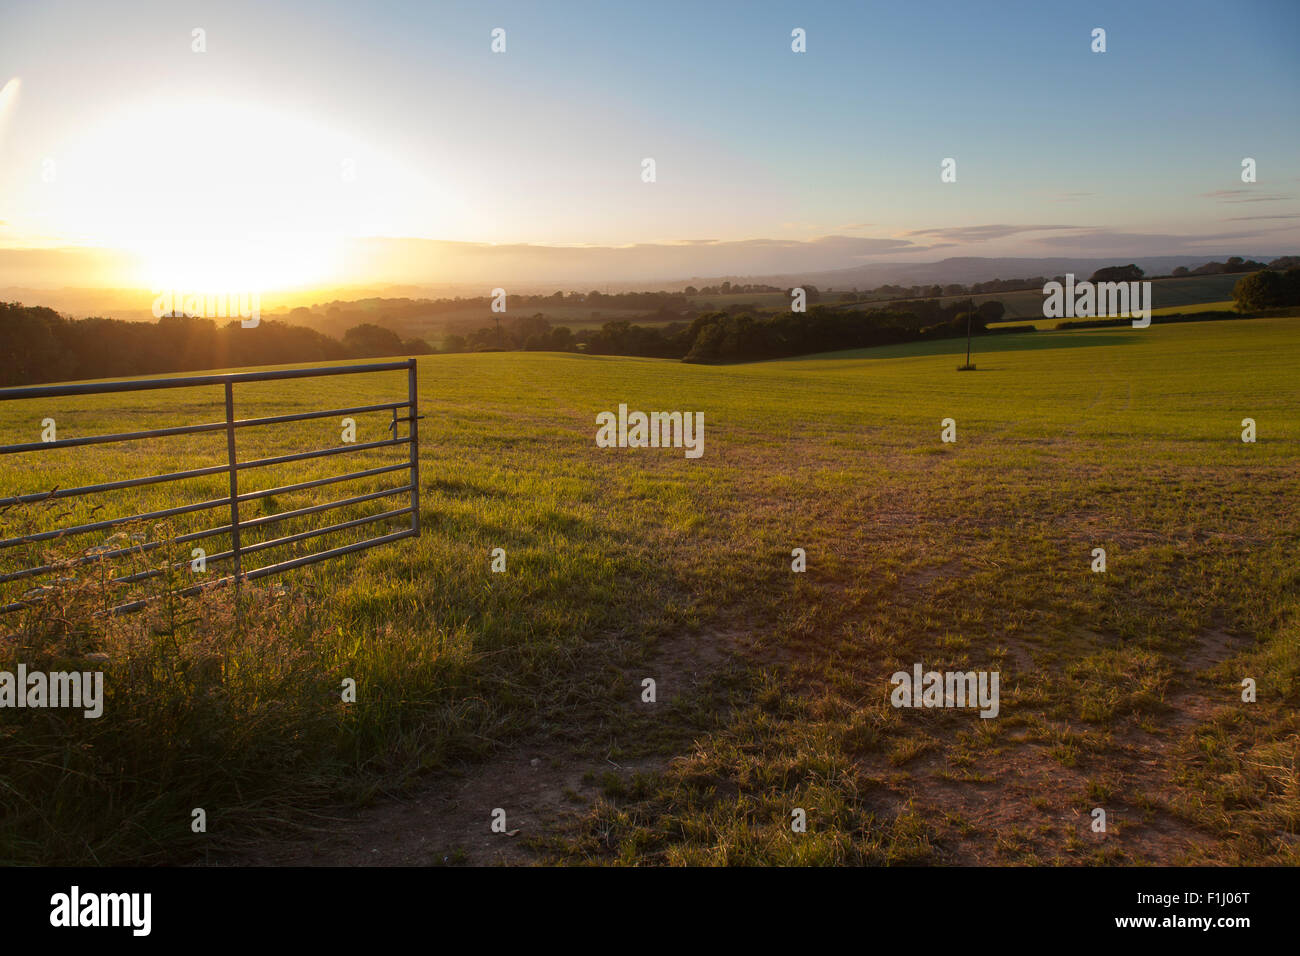 A galvanised metal gate opens onto a pasture with hills and sunset in the background, East Devon, England. Stock Photo